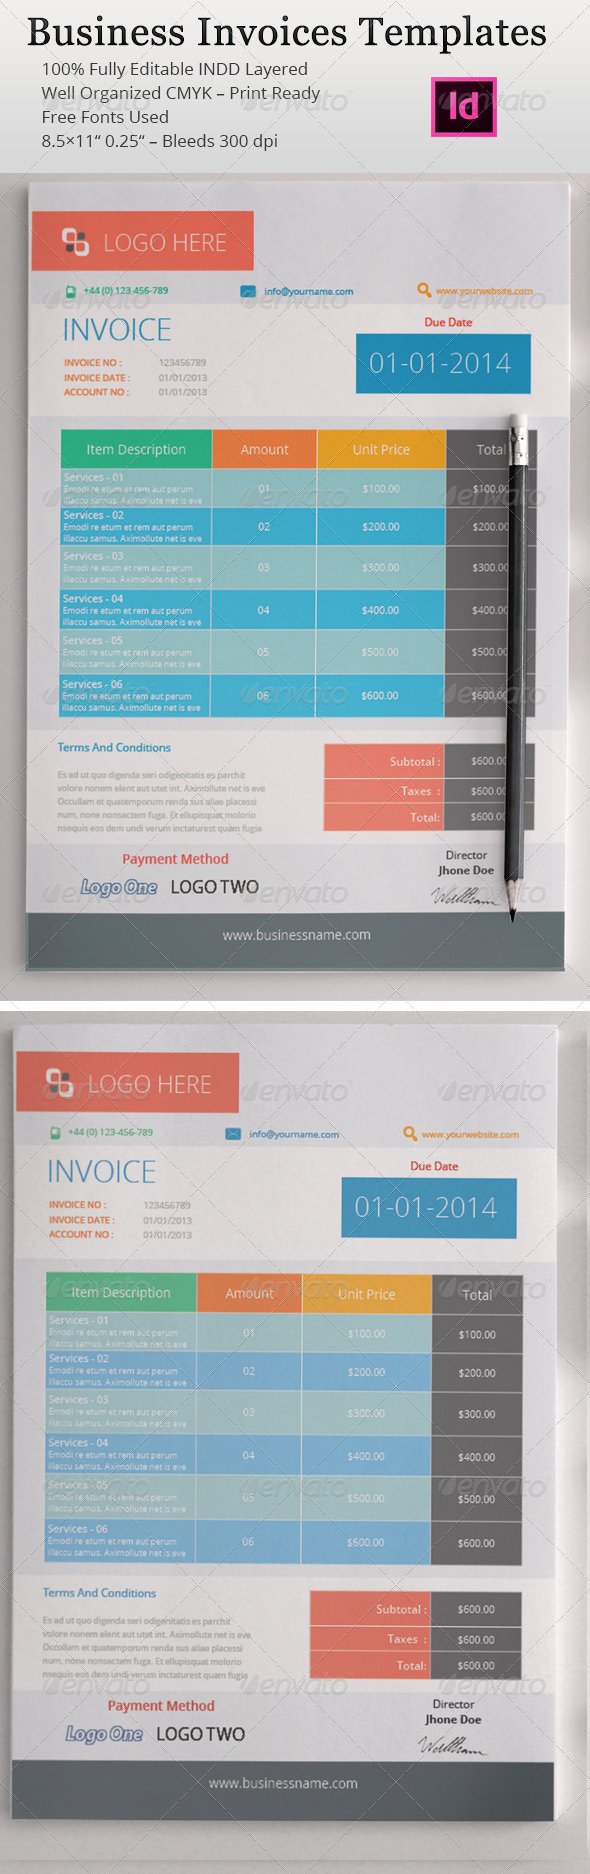 Free Indesign Invoice Template Inspirational Indesign Templates Invoices Dondrup